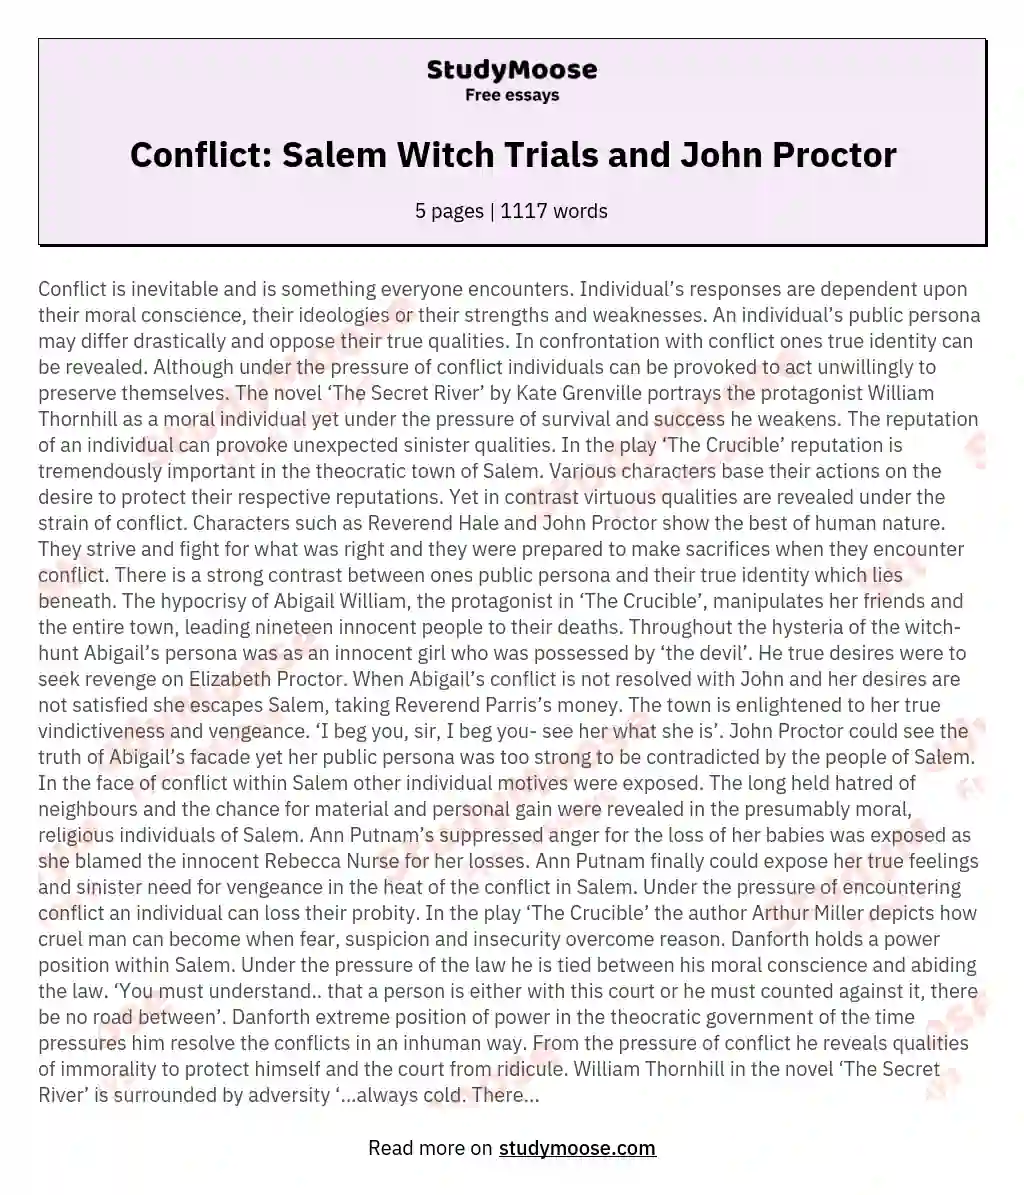 Conflict: Salem Witch Trials and John Proctor